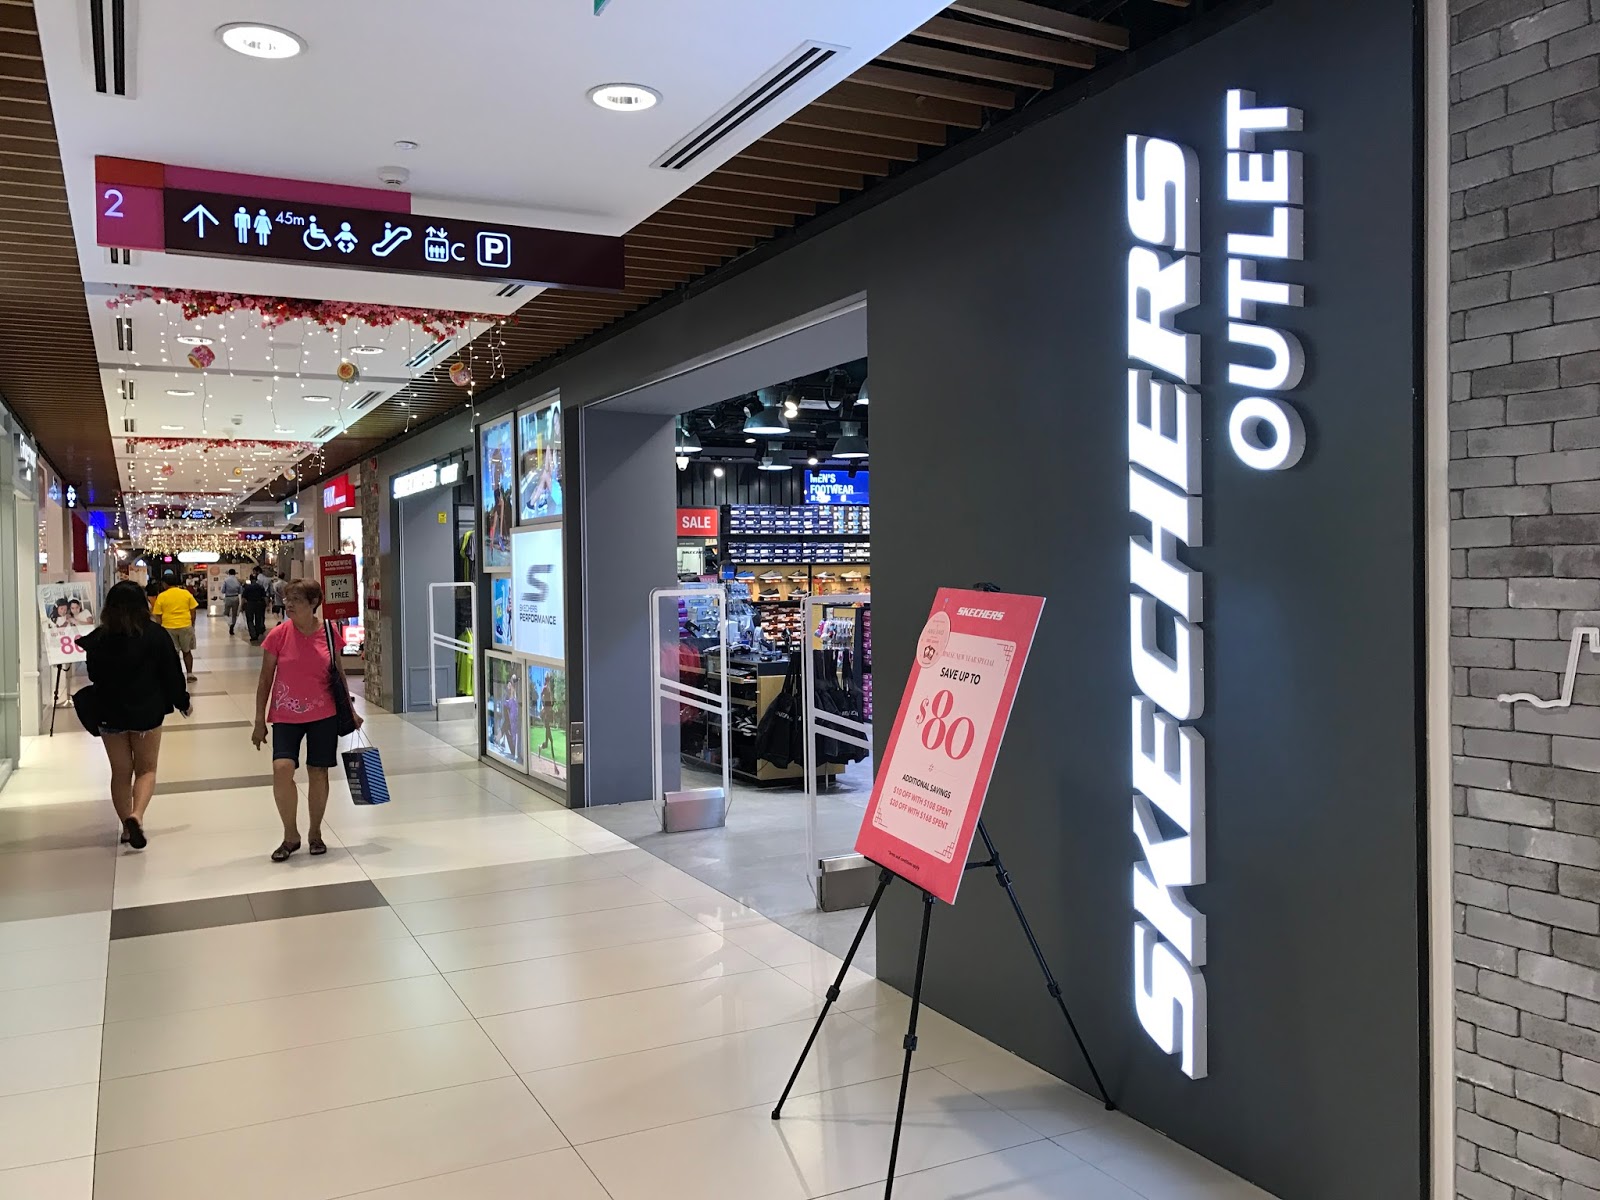 Shopping for running shoes? The best place in Singapore to go is…